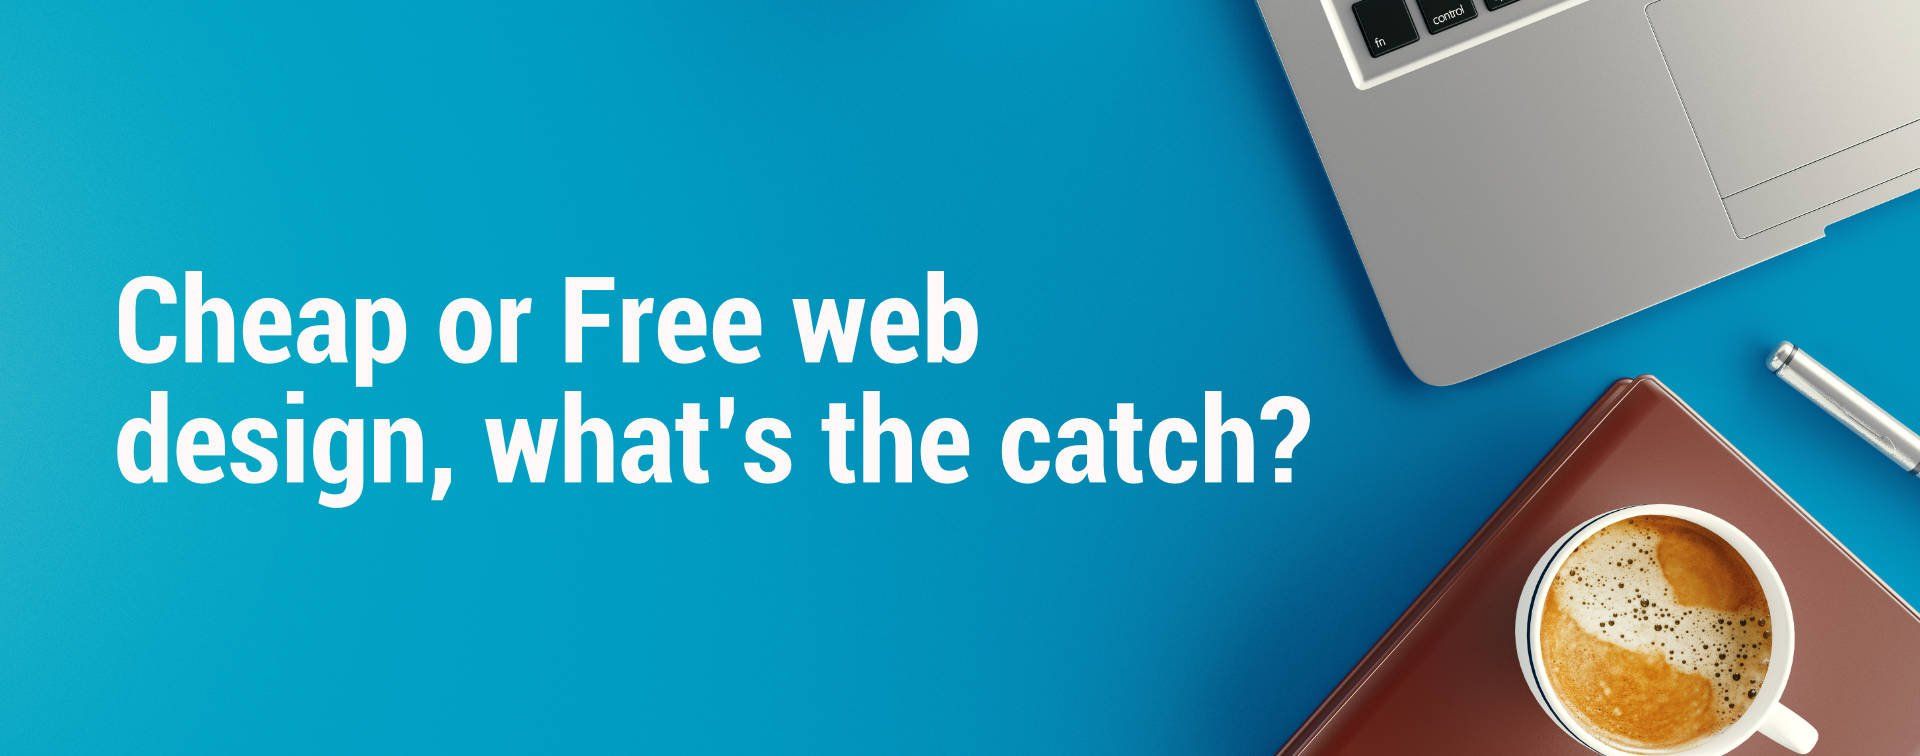 Cheap or Free web design, what’s the catch?